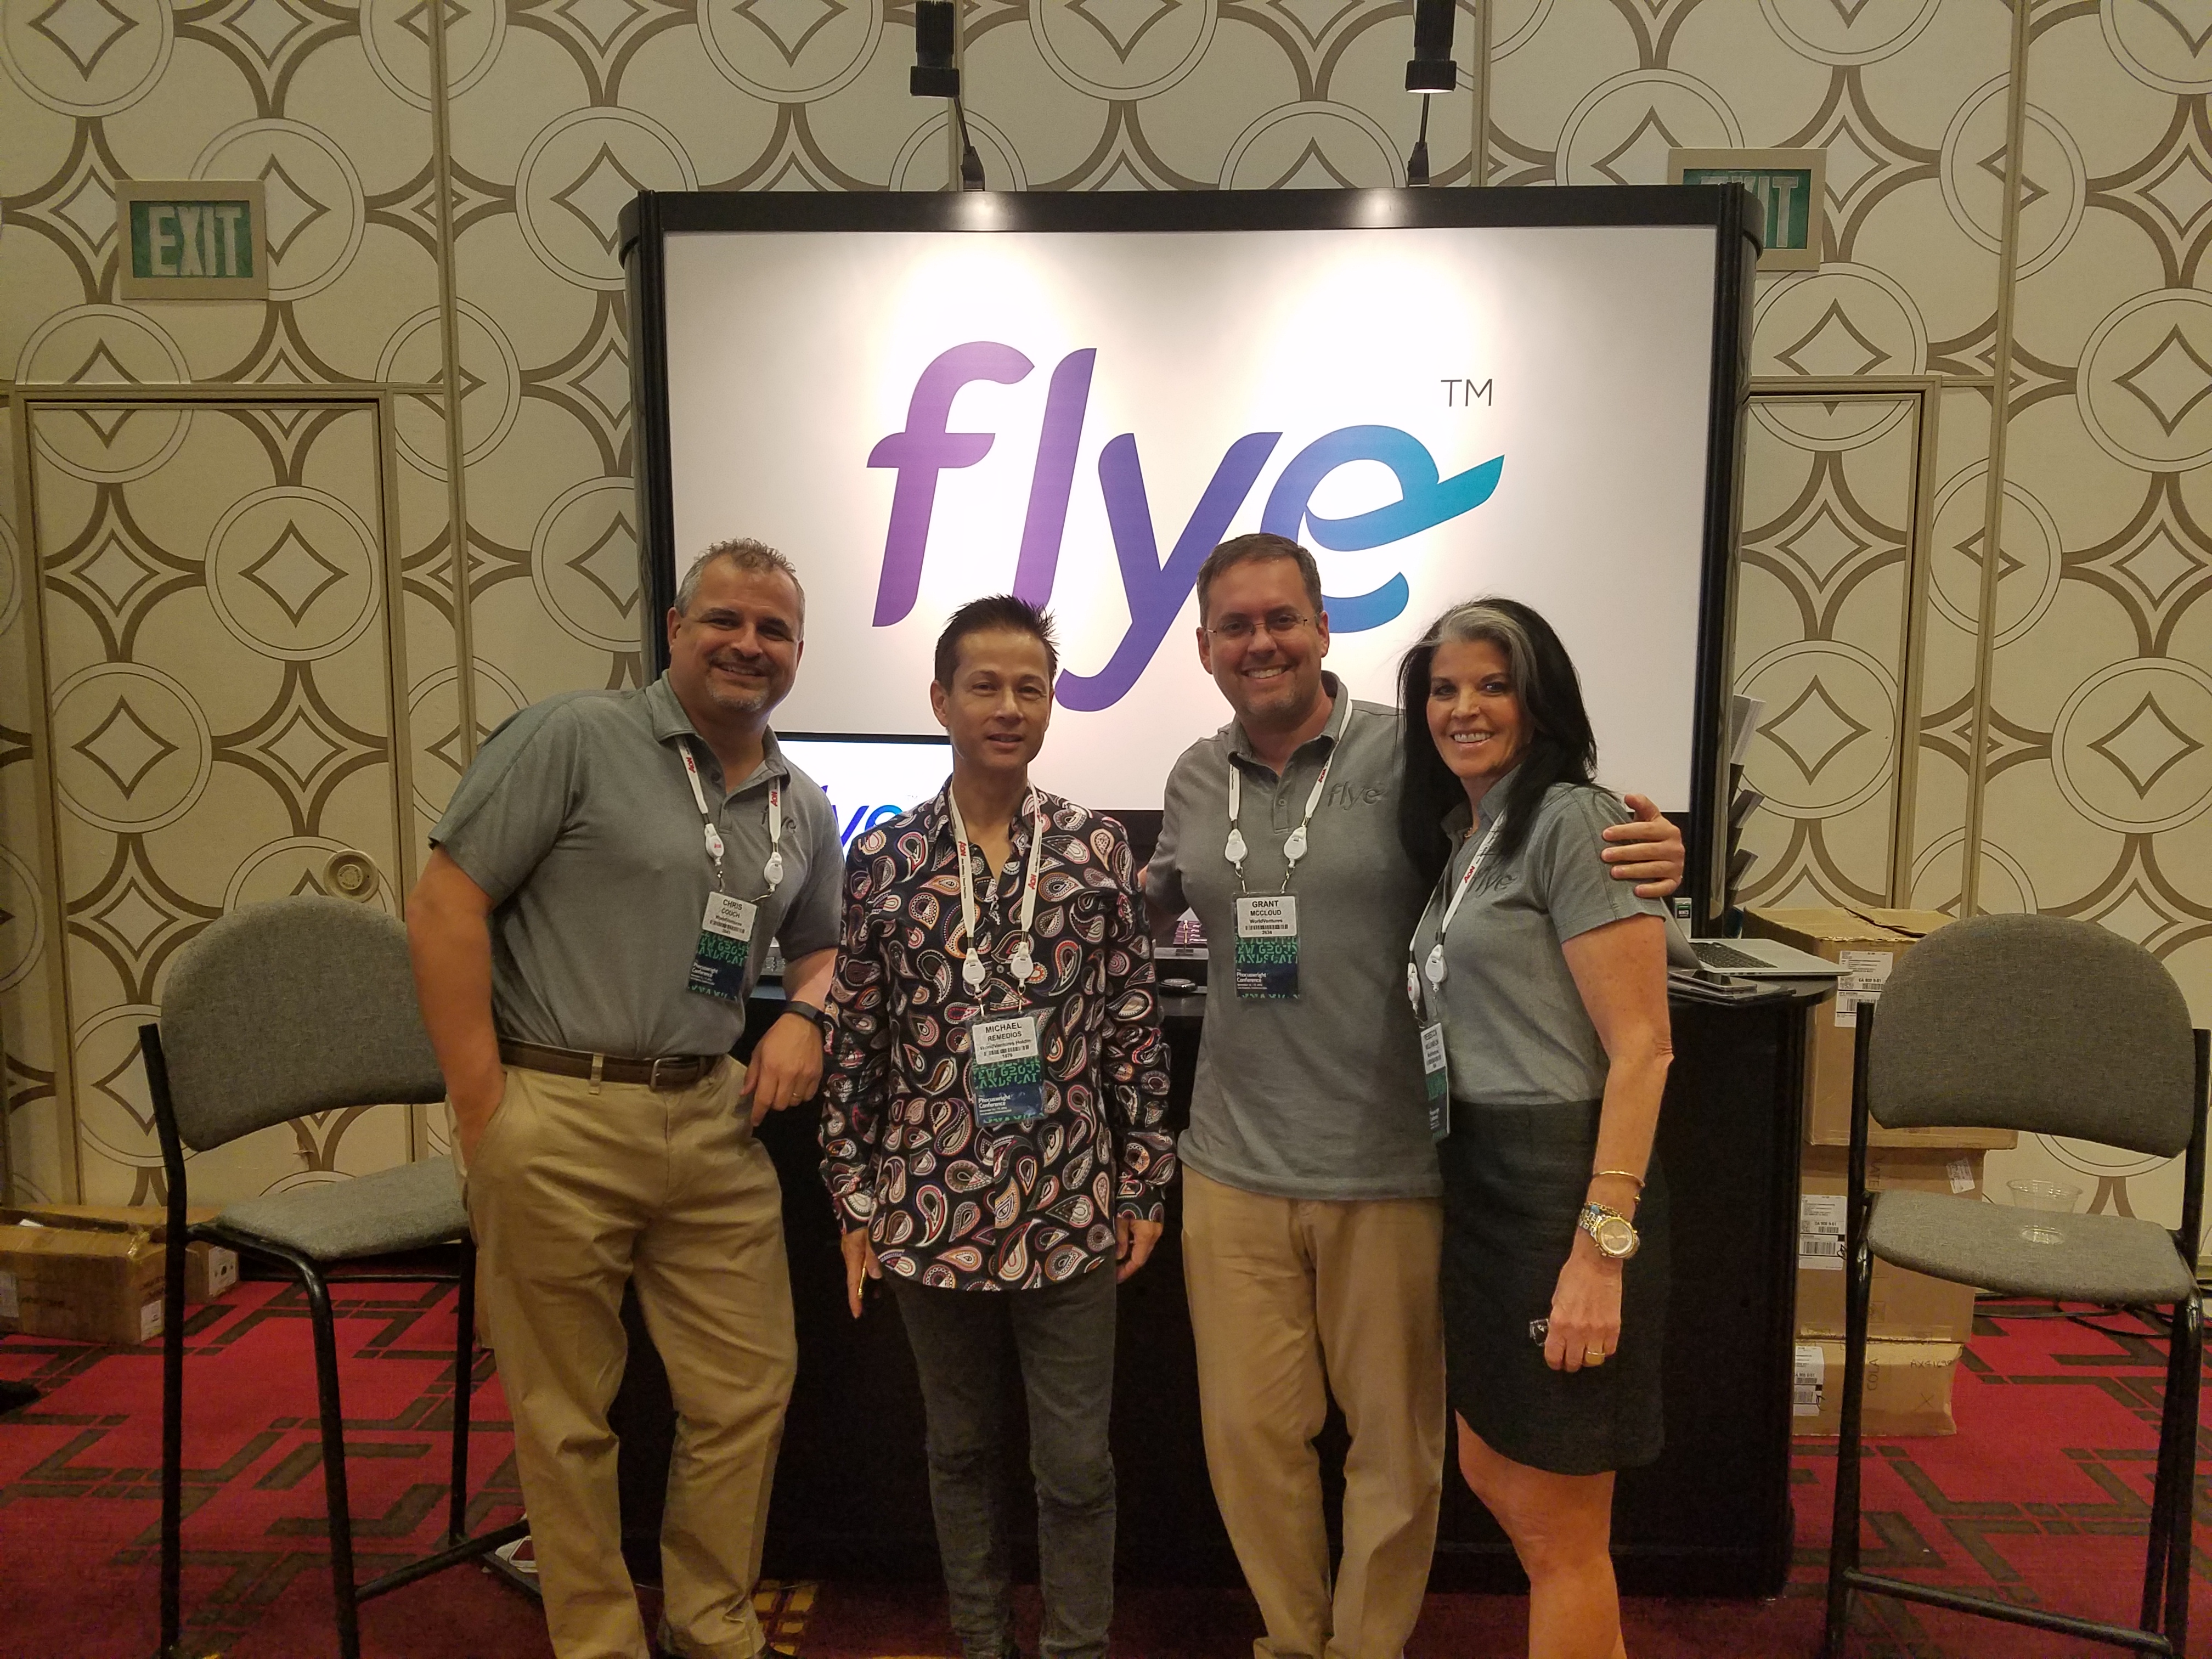 flye smart card booth at Phocuswright